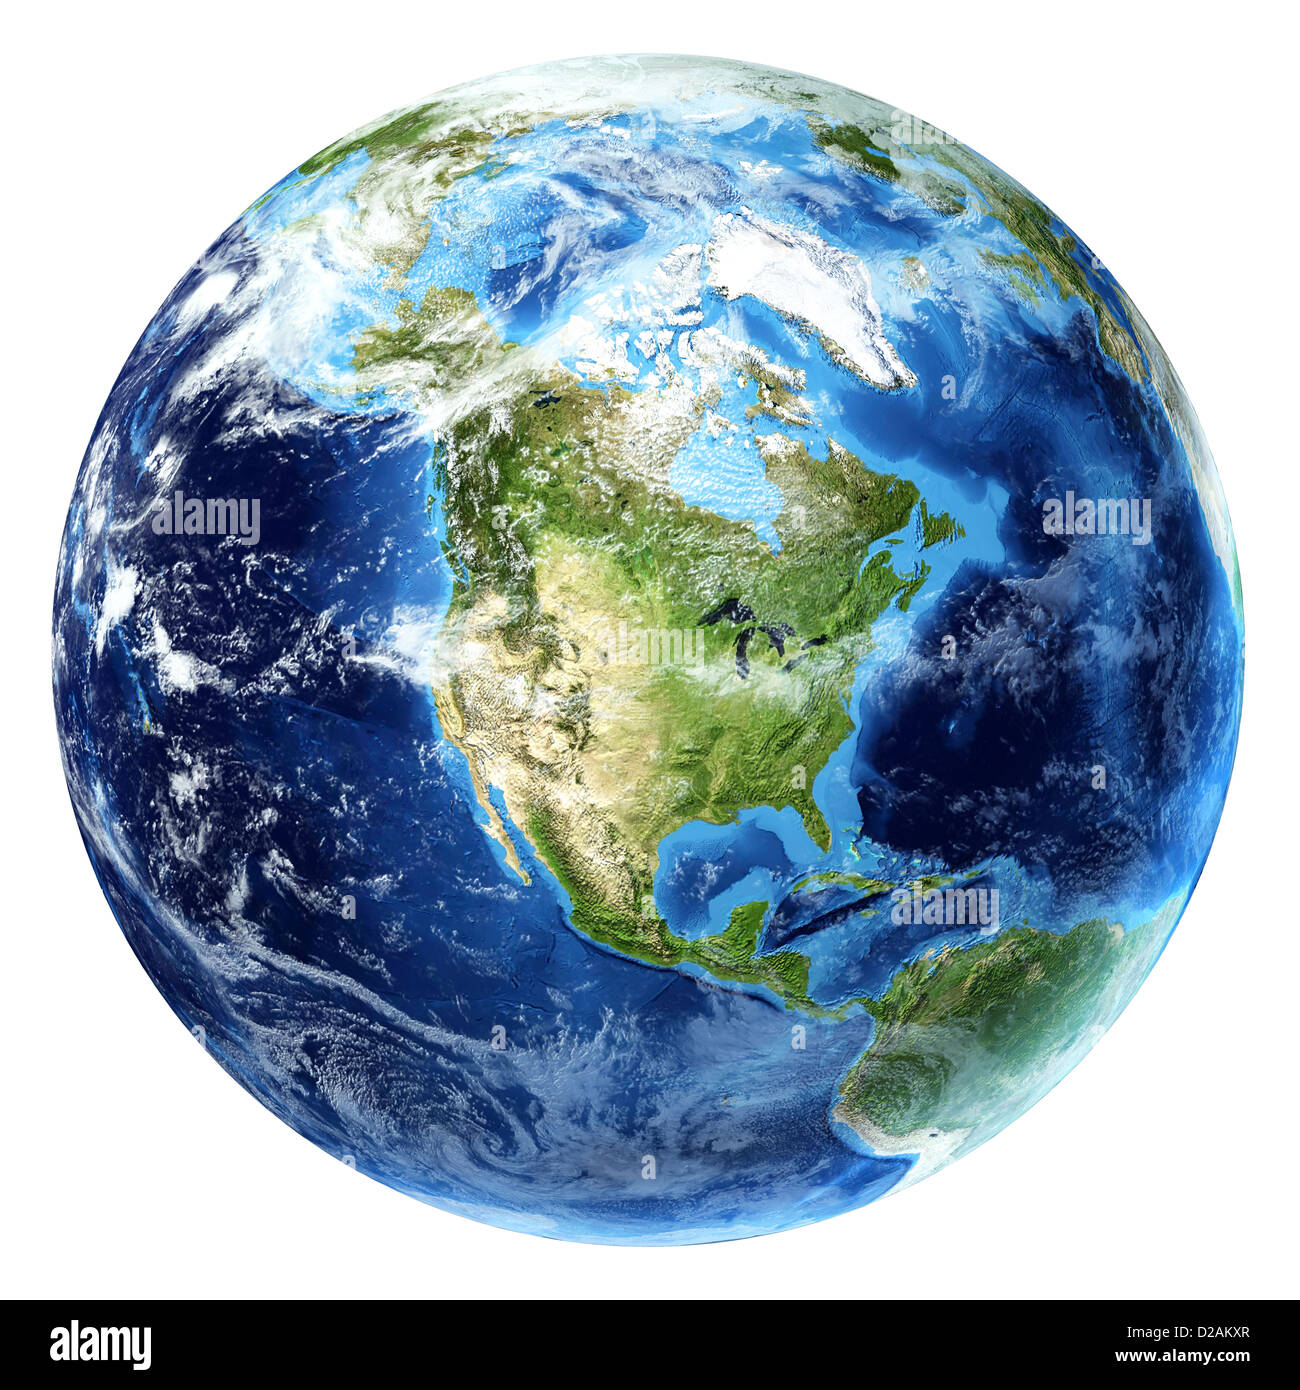 Planet earth with some clouds. North America view. Stock Photo